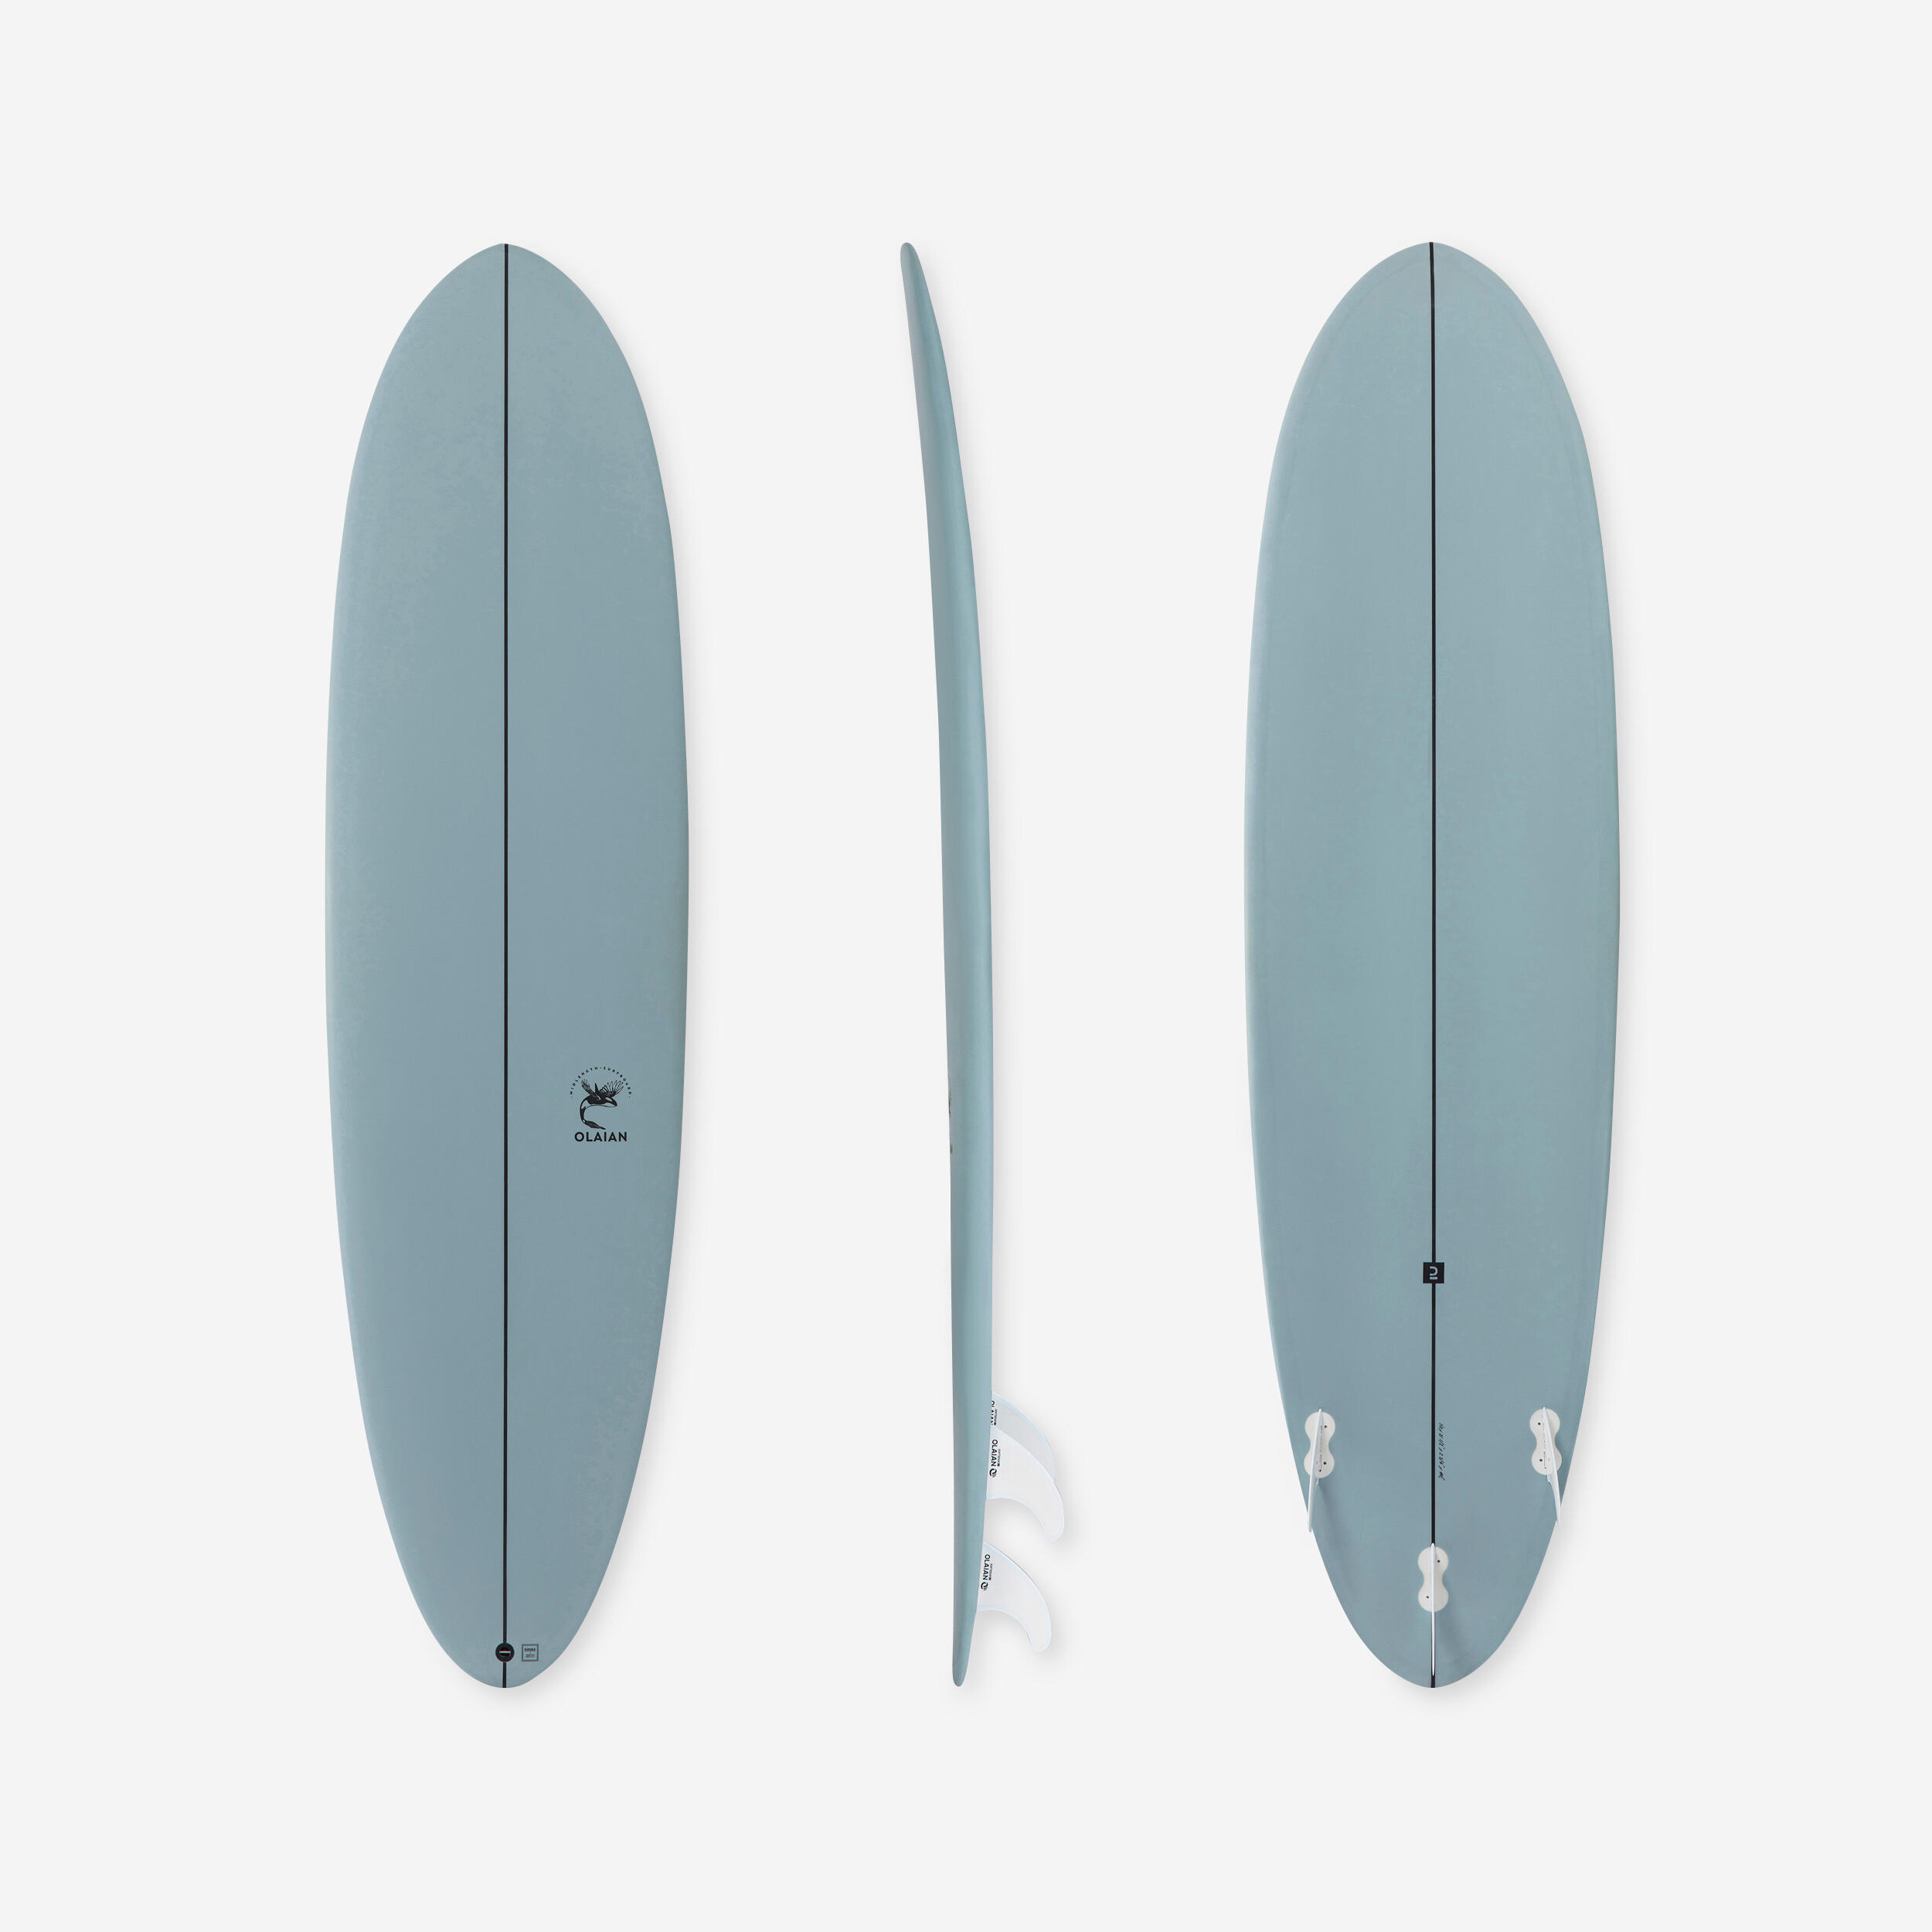 OLAIAN SURFBOARD 500 Hybrid 7' with three fins.